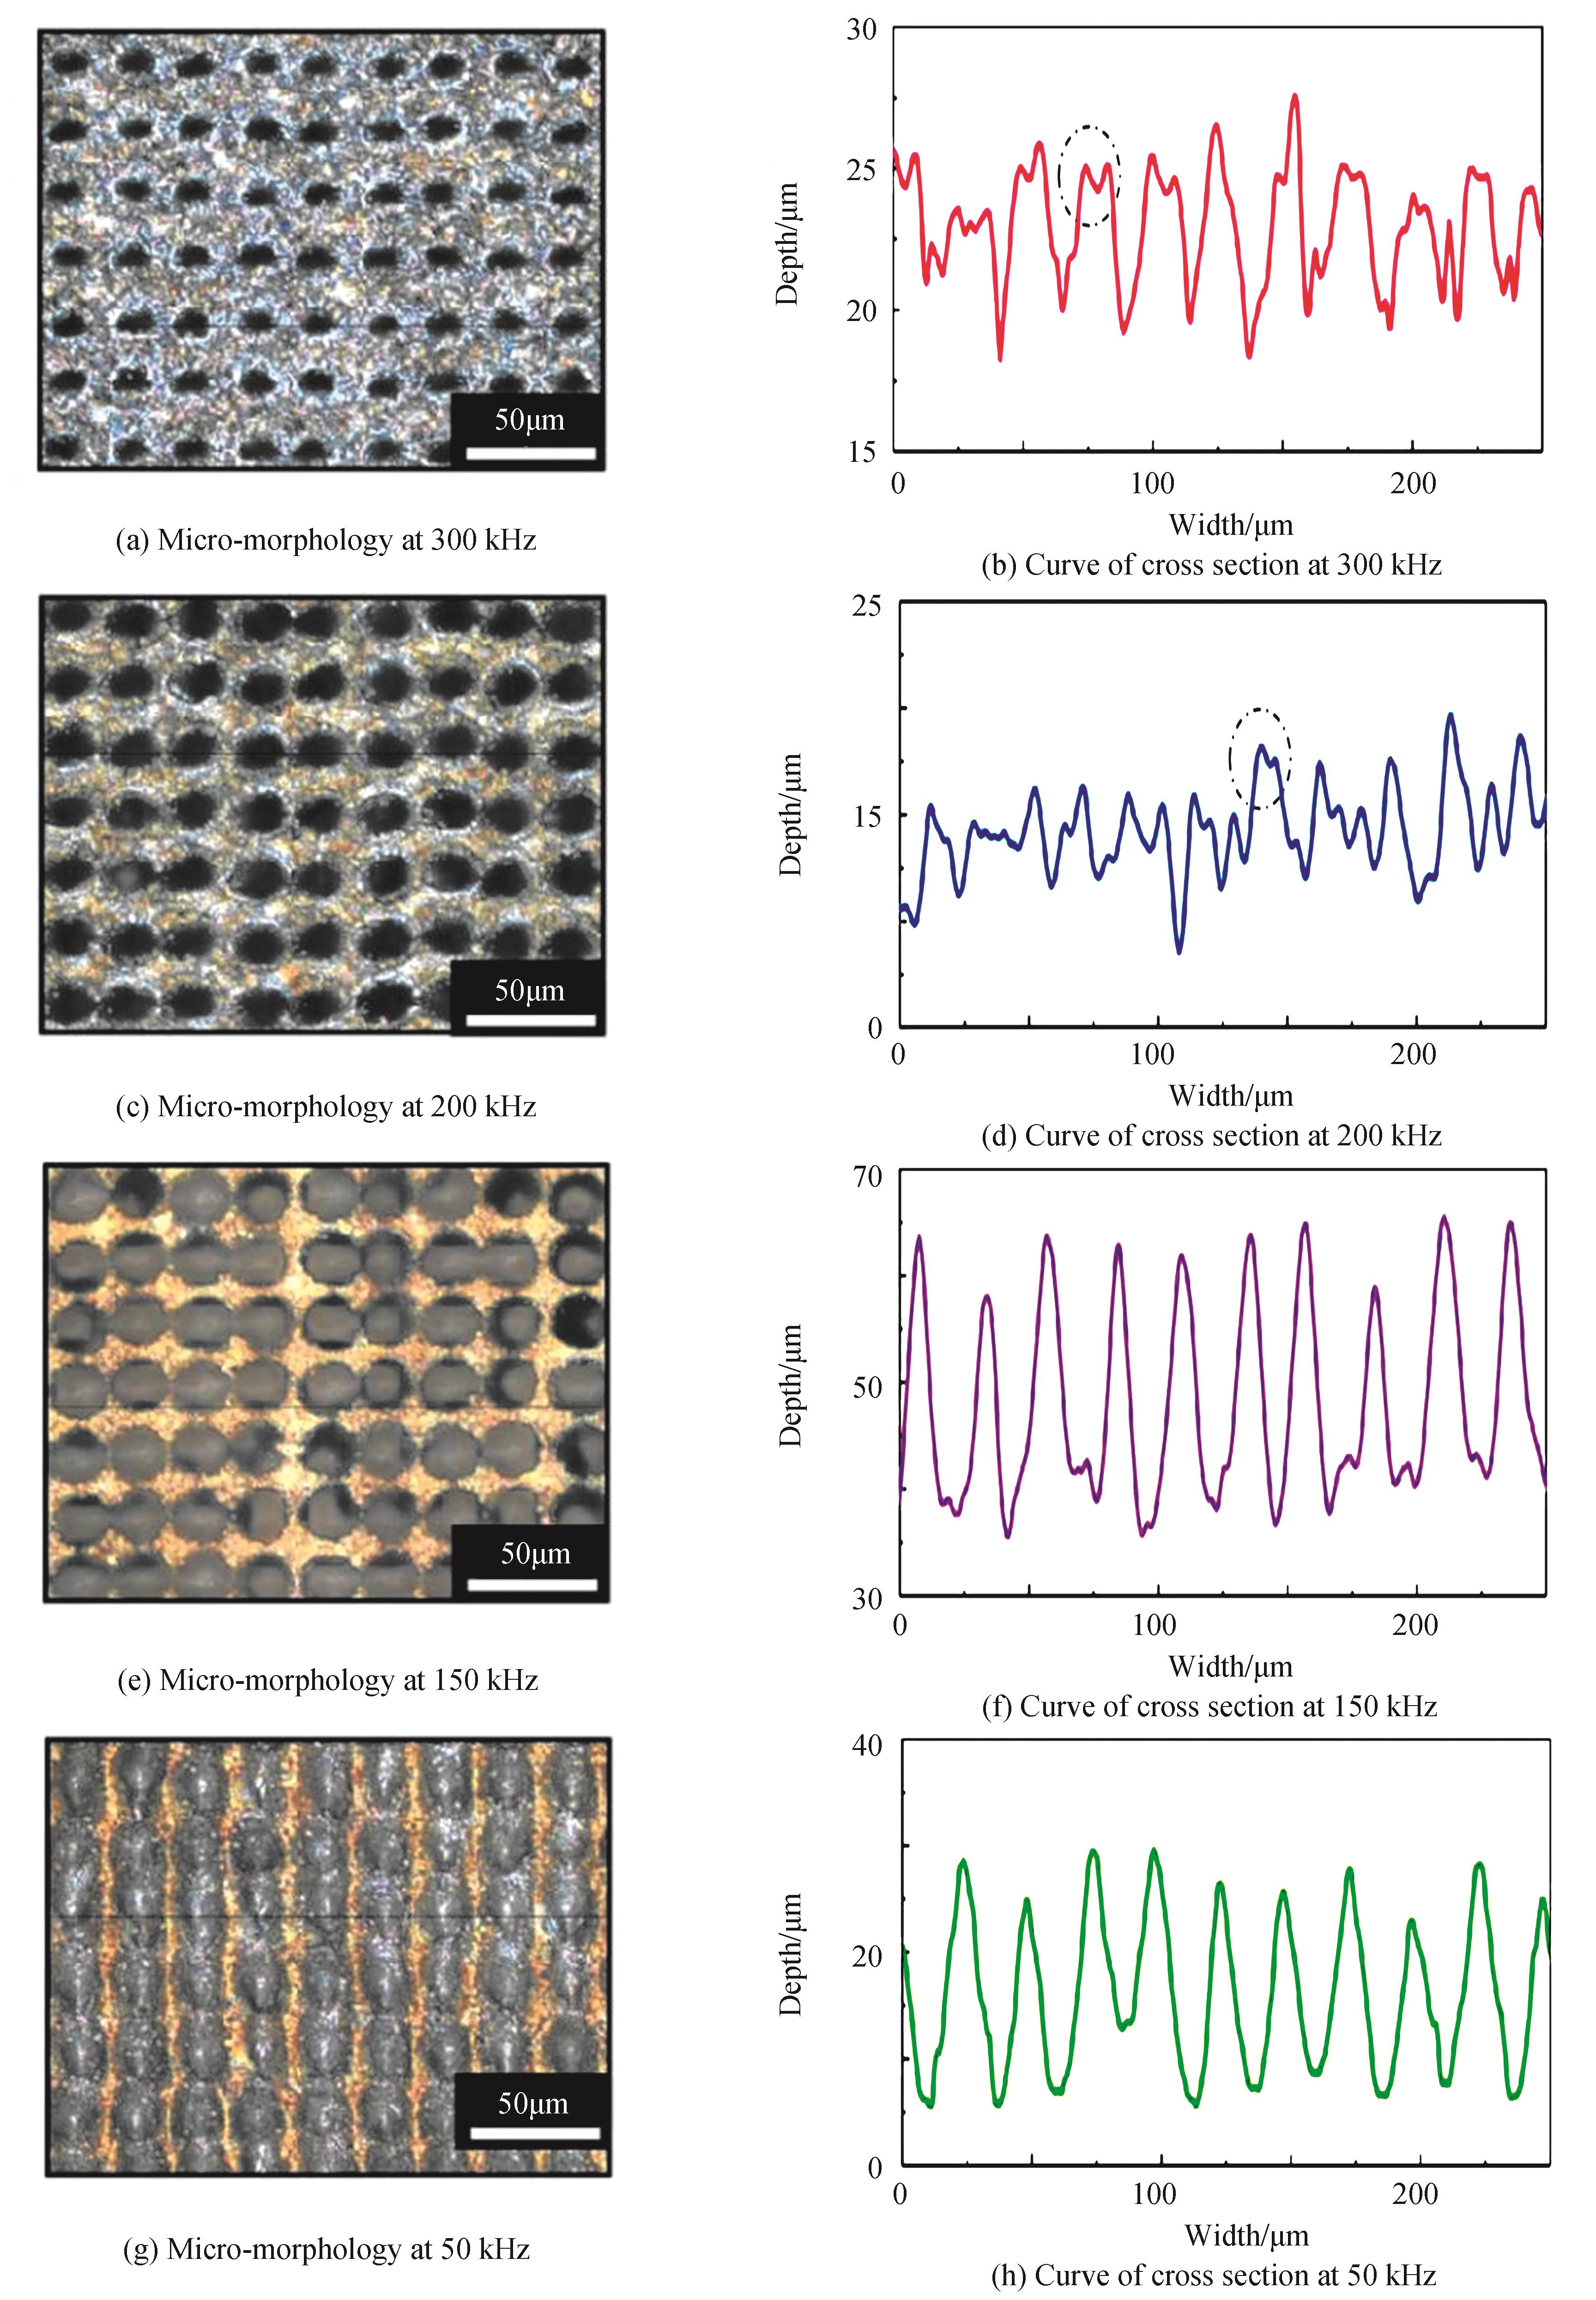 Micro-morphologies and corresponding curves of cross section of laser-textured polysilicon sample under different frequency